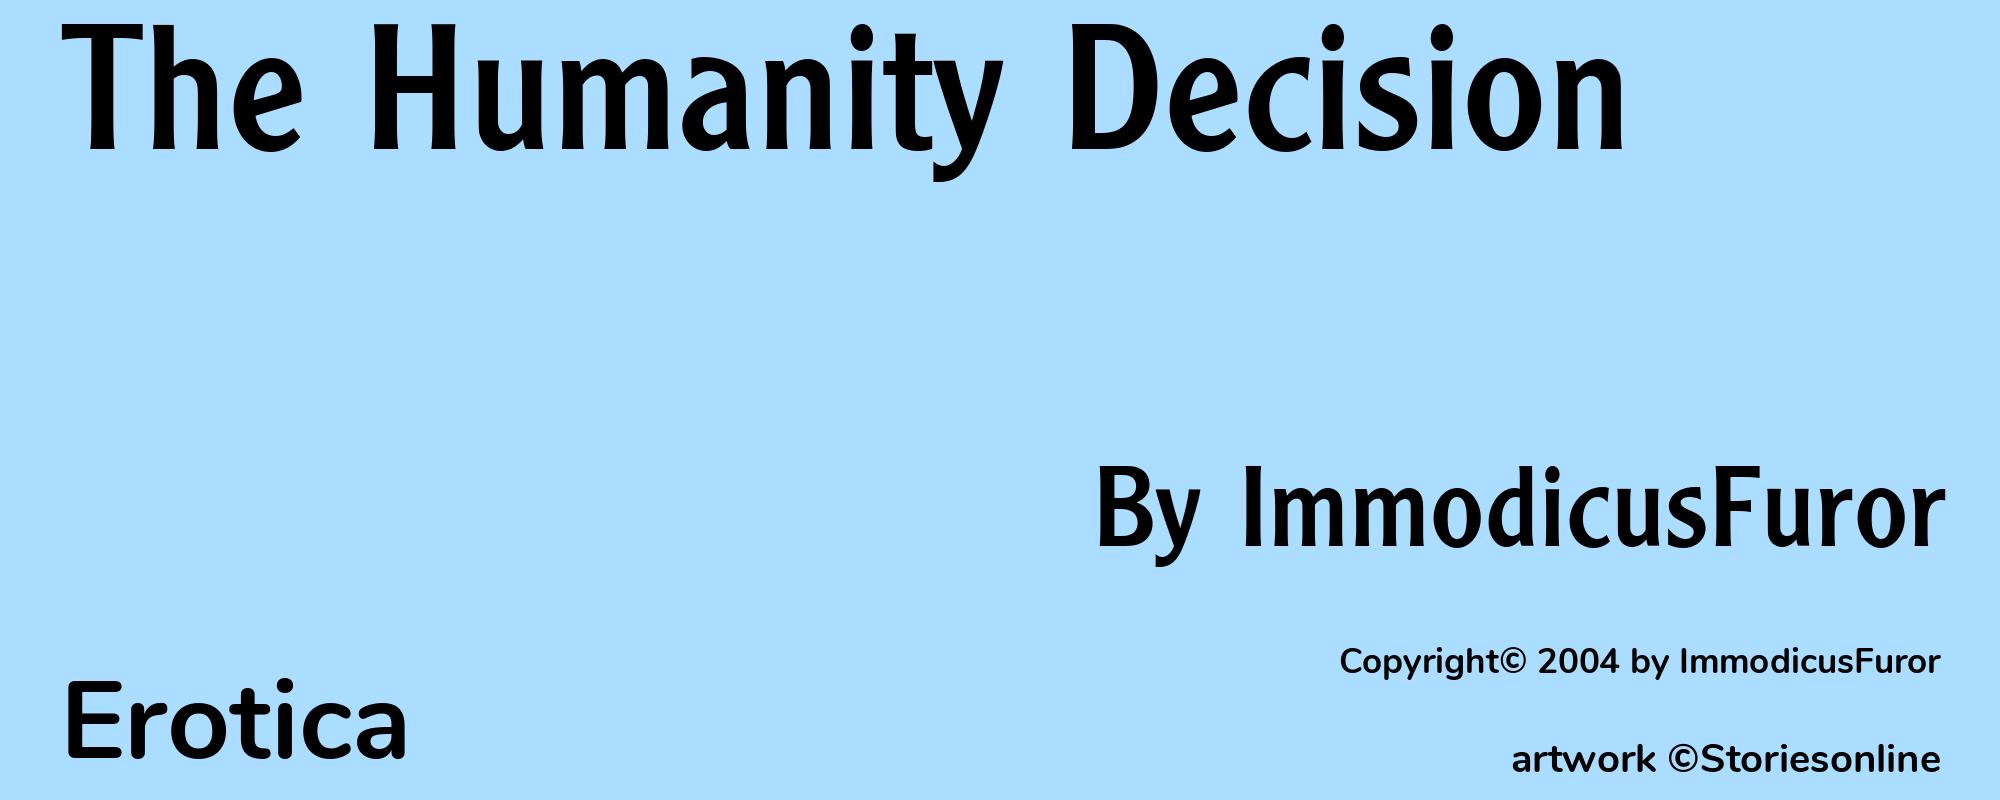 The Humanity Decision - Cover